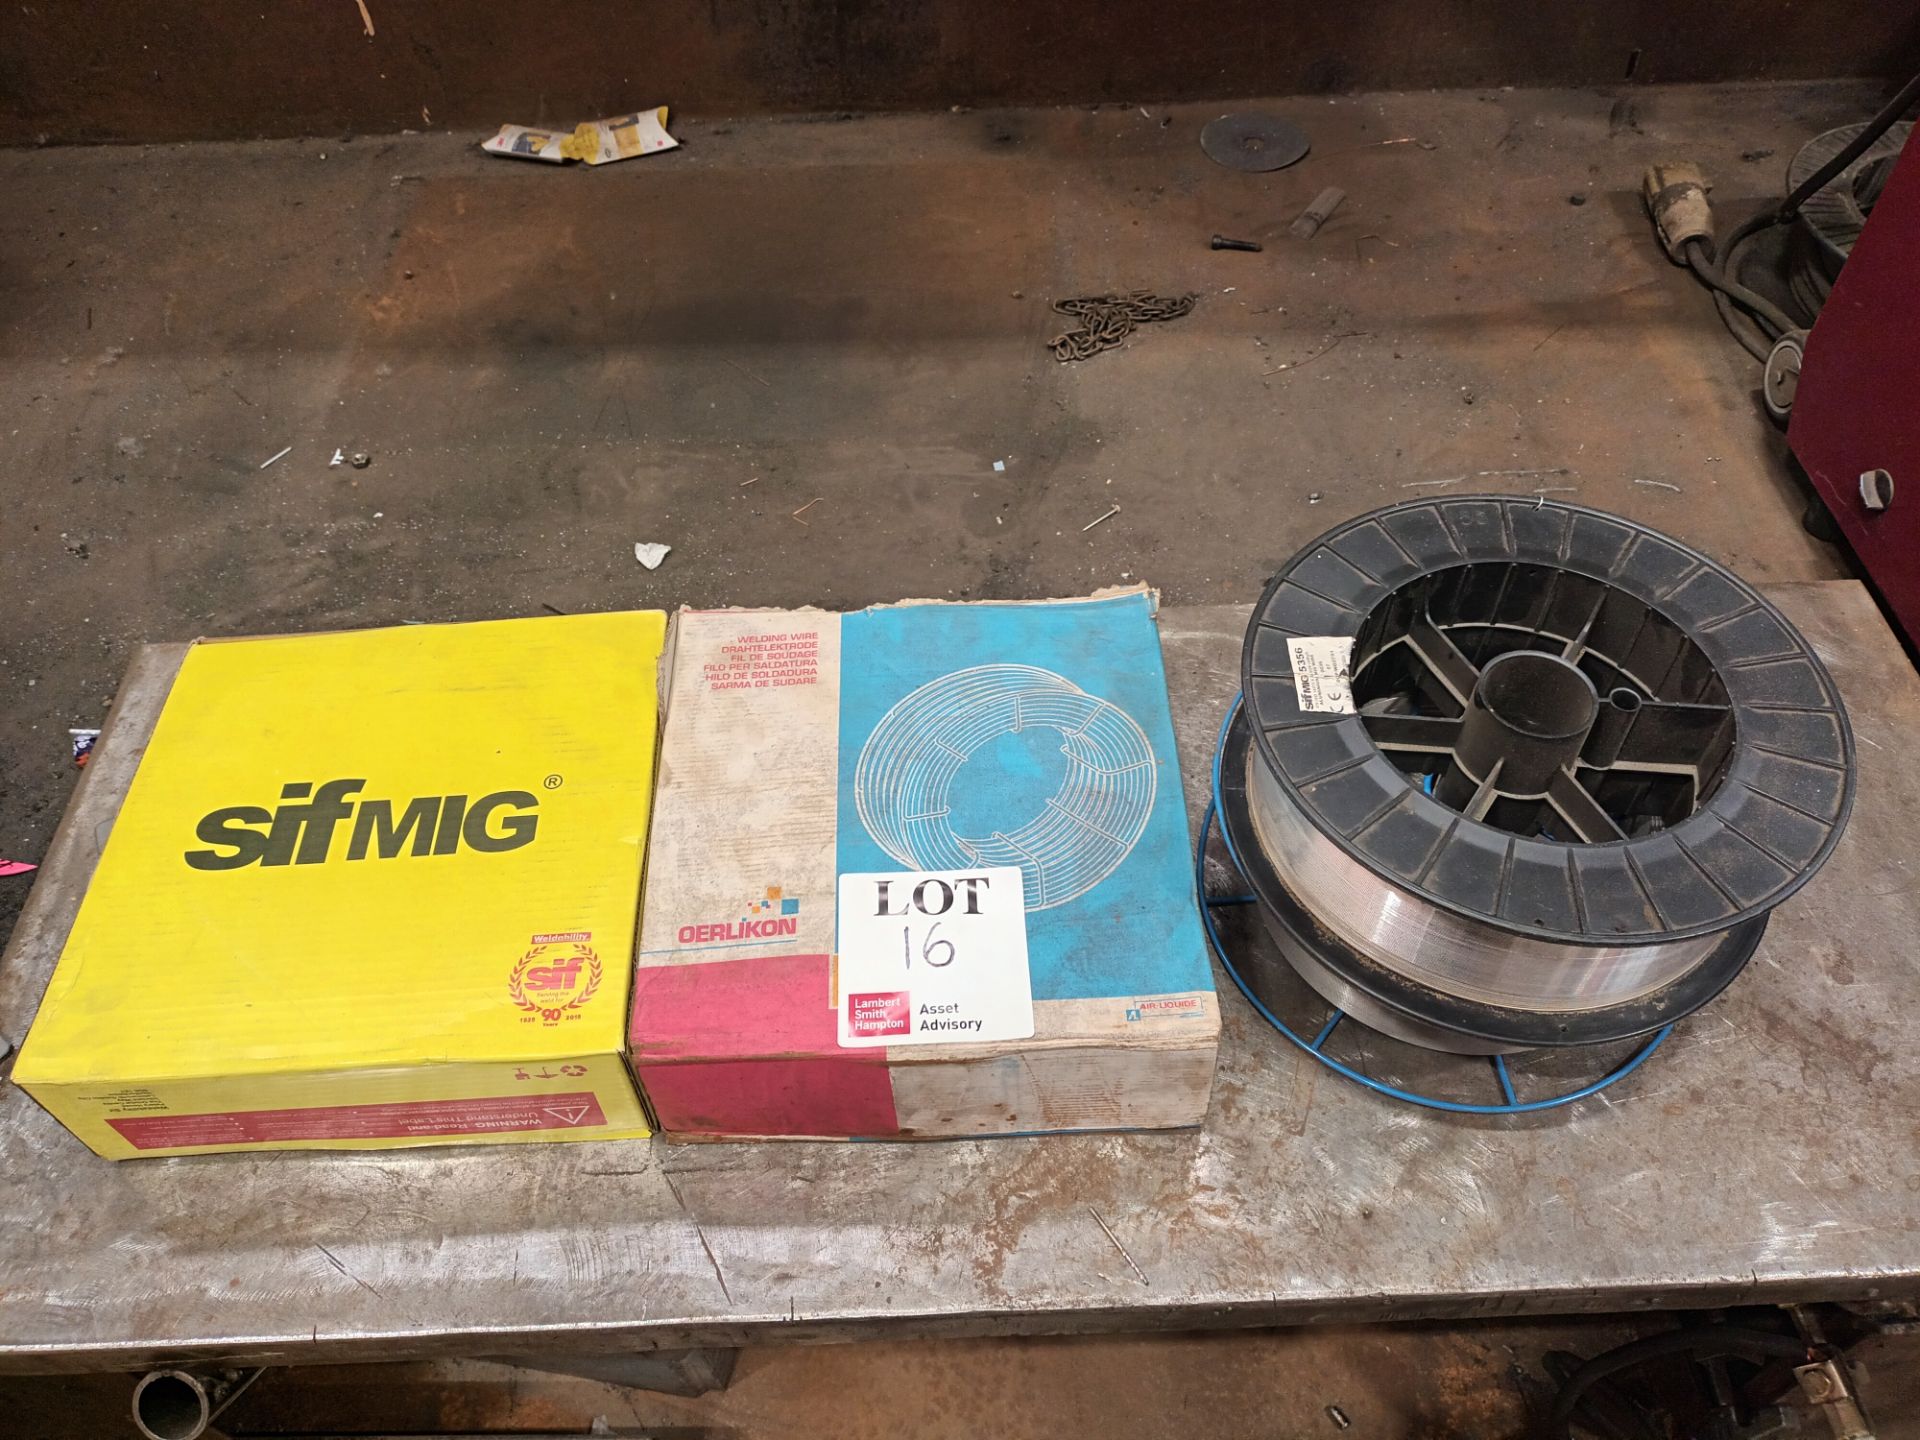 SifMig and Oerlikon welding wire and two reels of welding wire